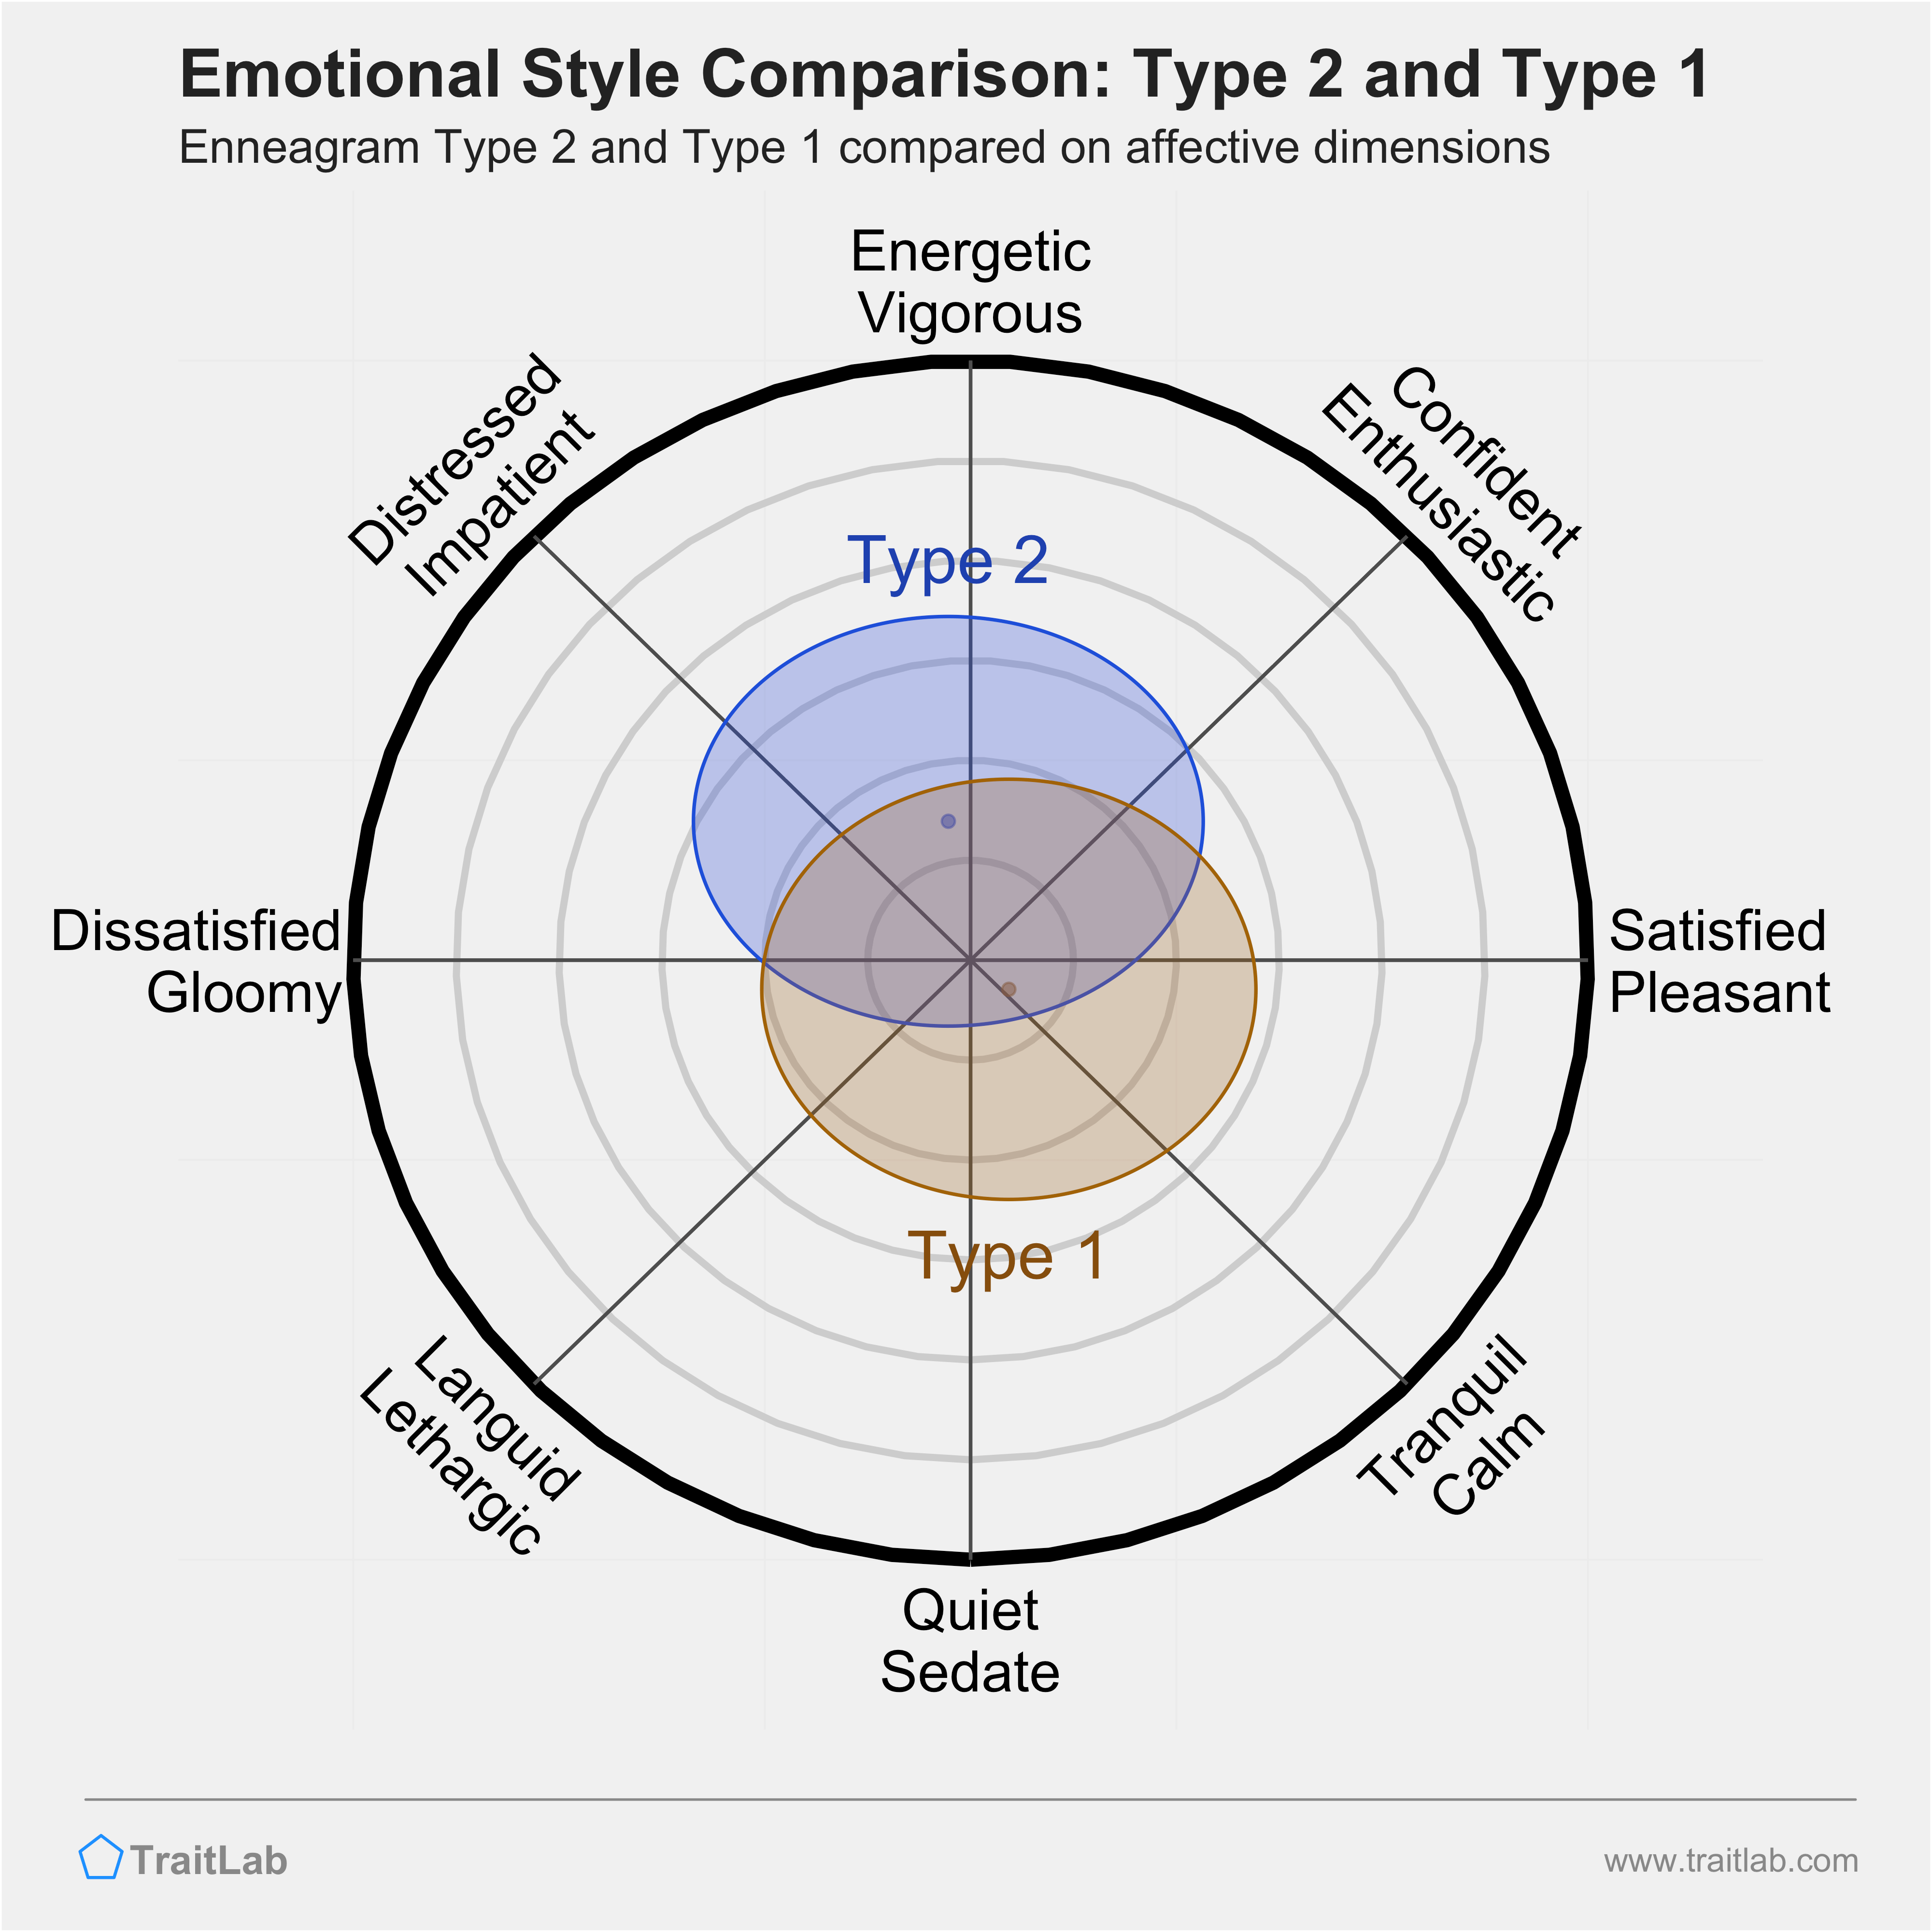 Type 2 and Type 1 comparison across emotional (affective) dimensions